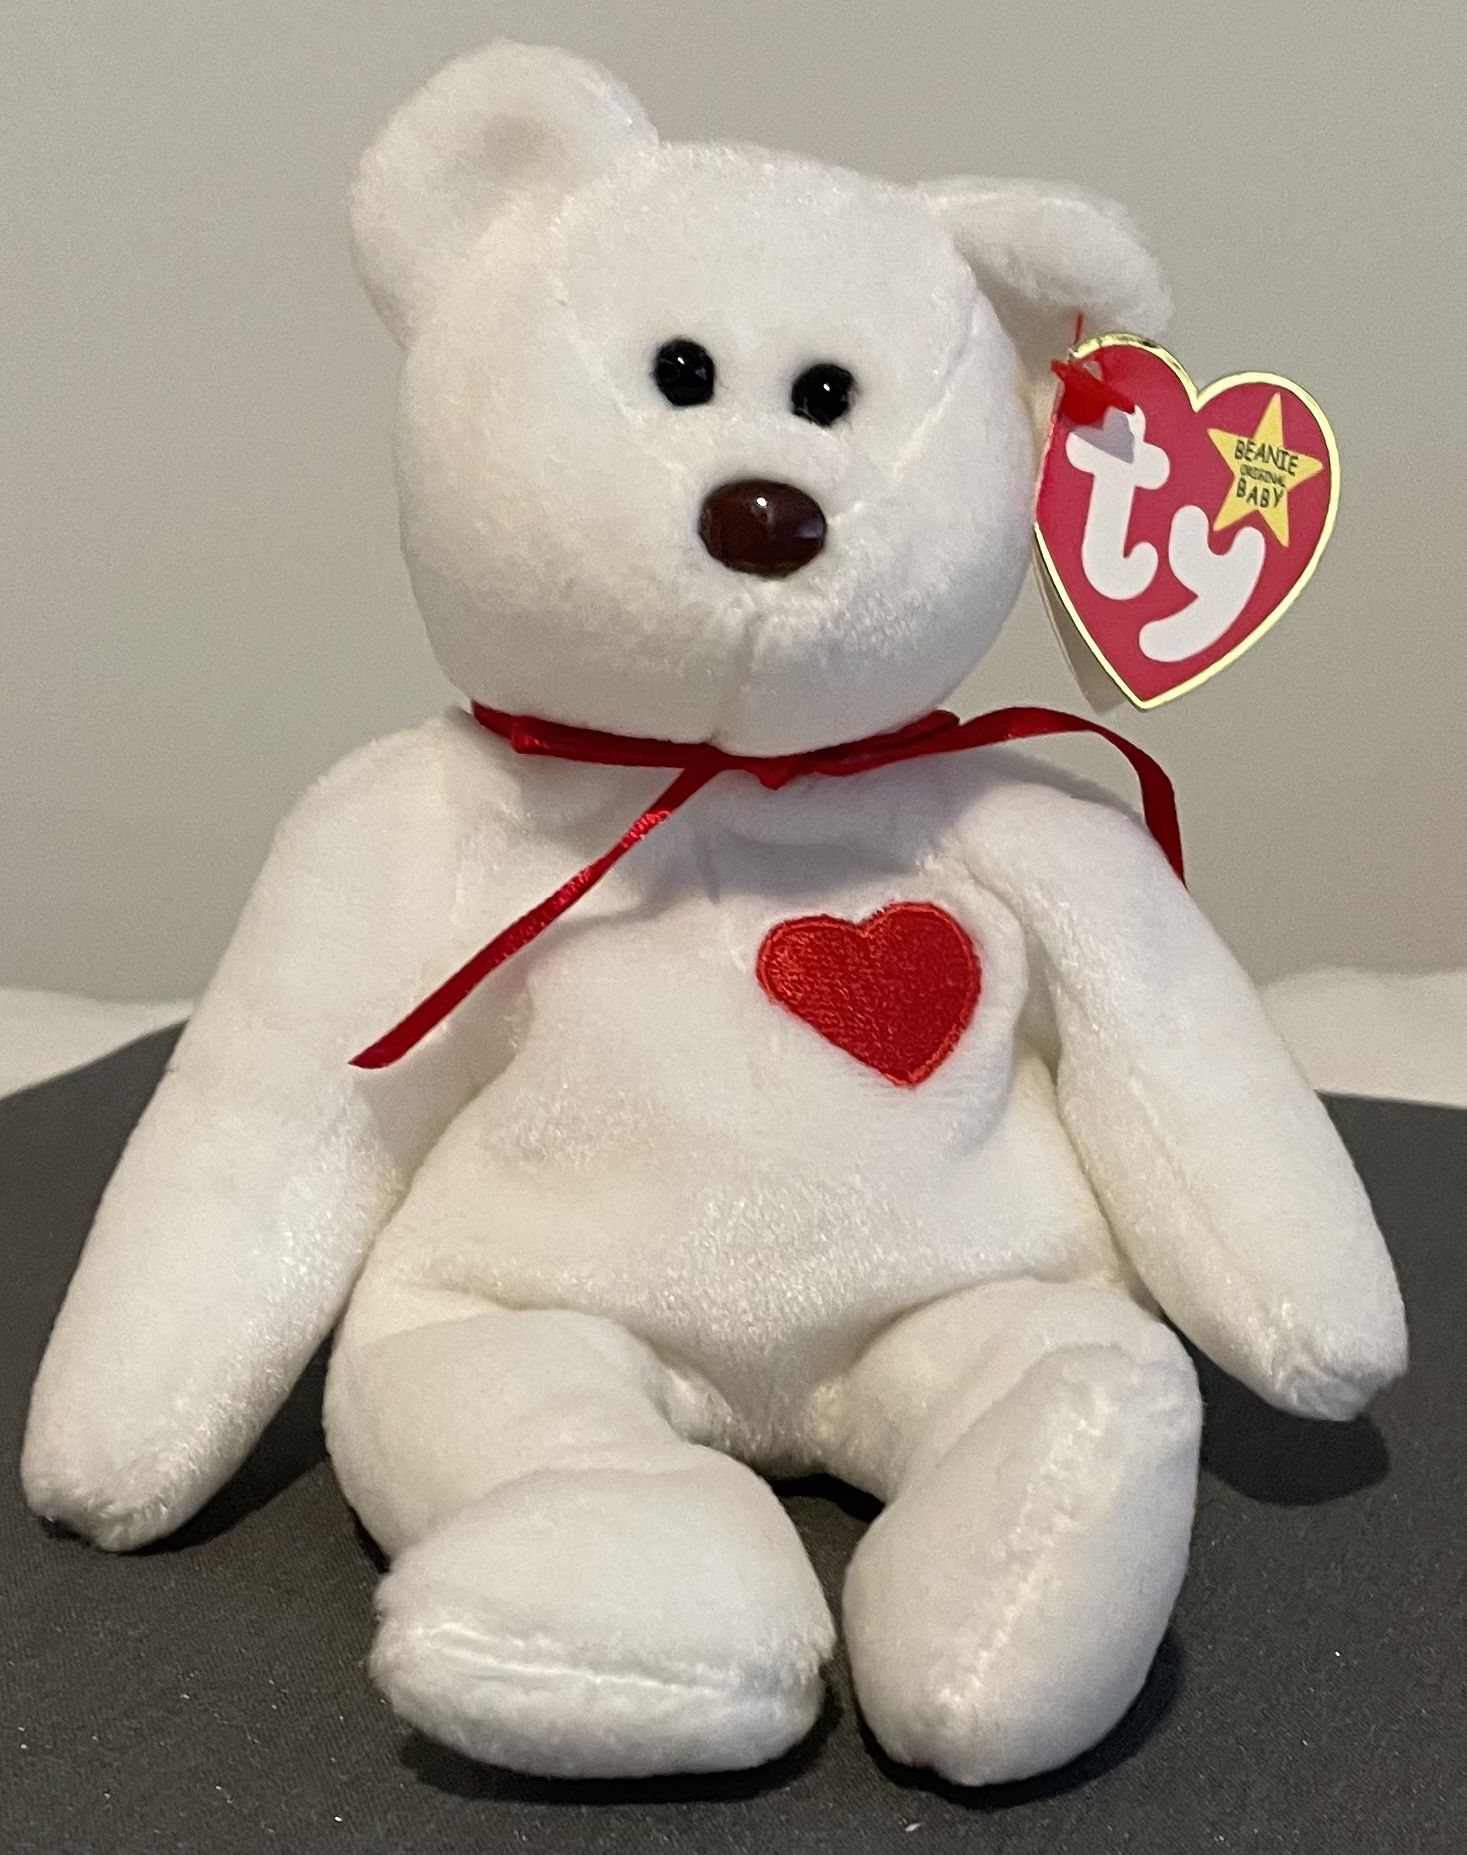 Ty Beanie Babies - Valentino and Valentina - Excellent Condition. 